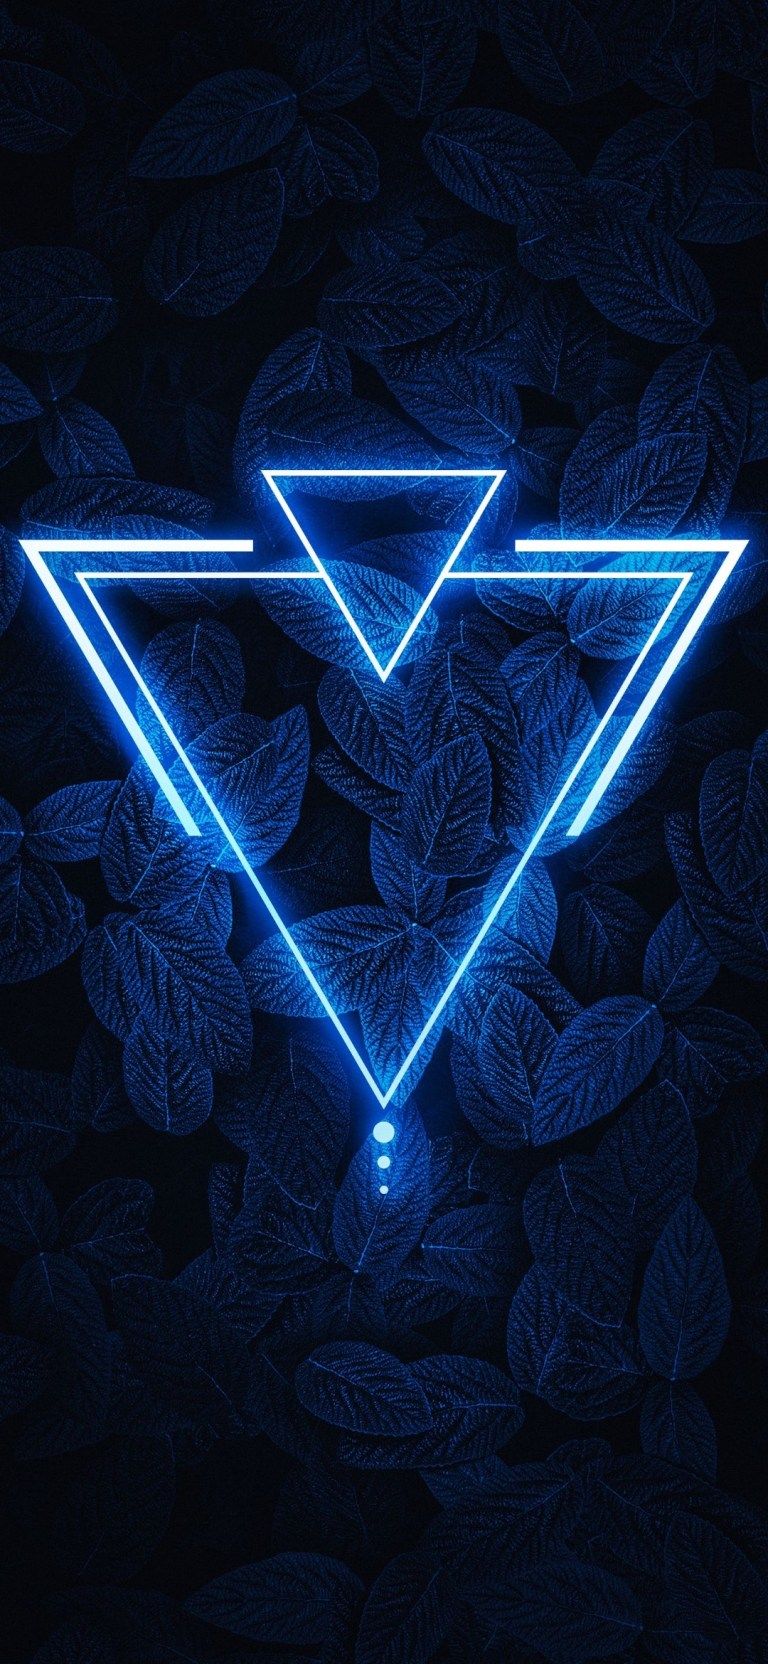 Neon Triangle Leaf Background for Samsung Galaxy S20 Ultra 5G